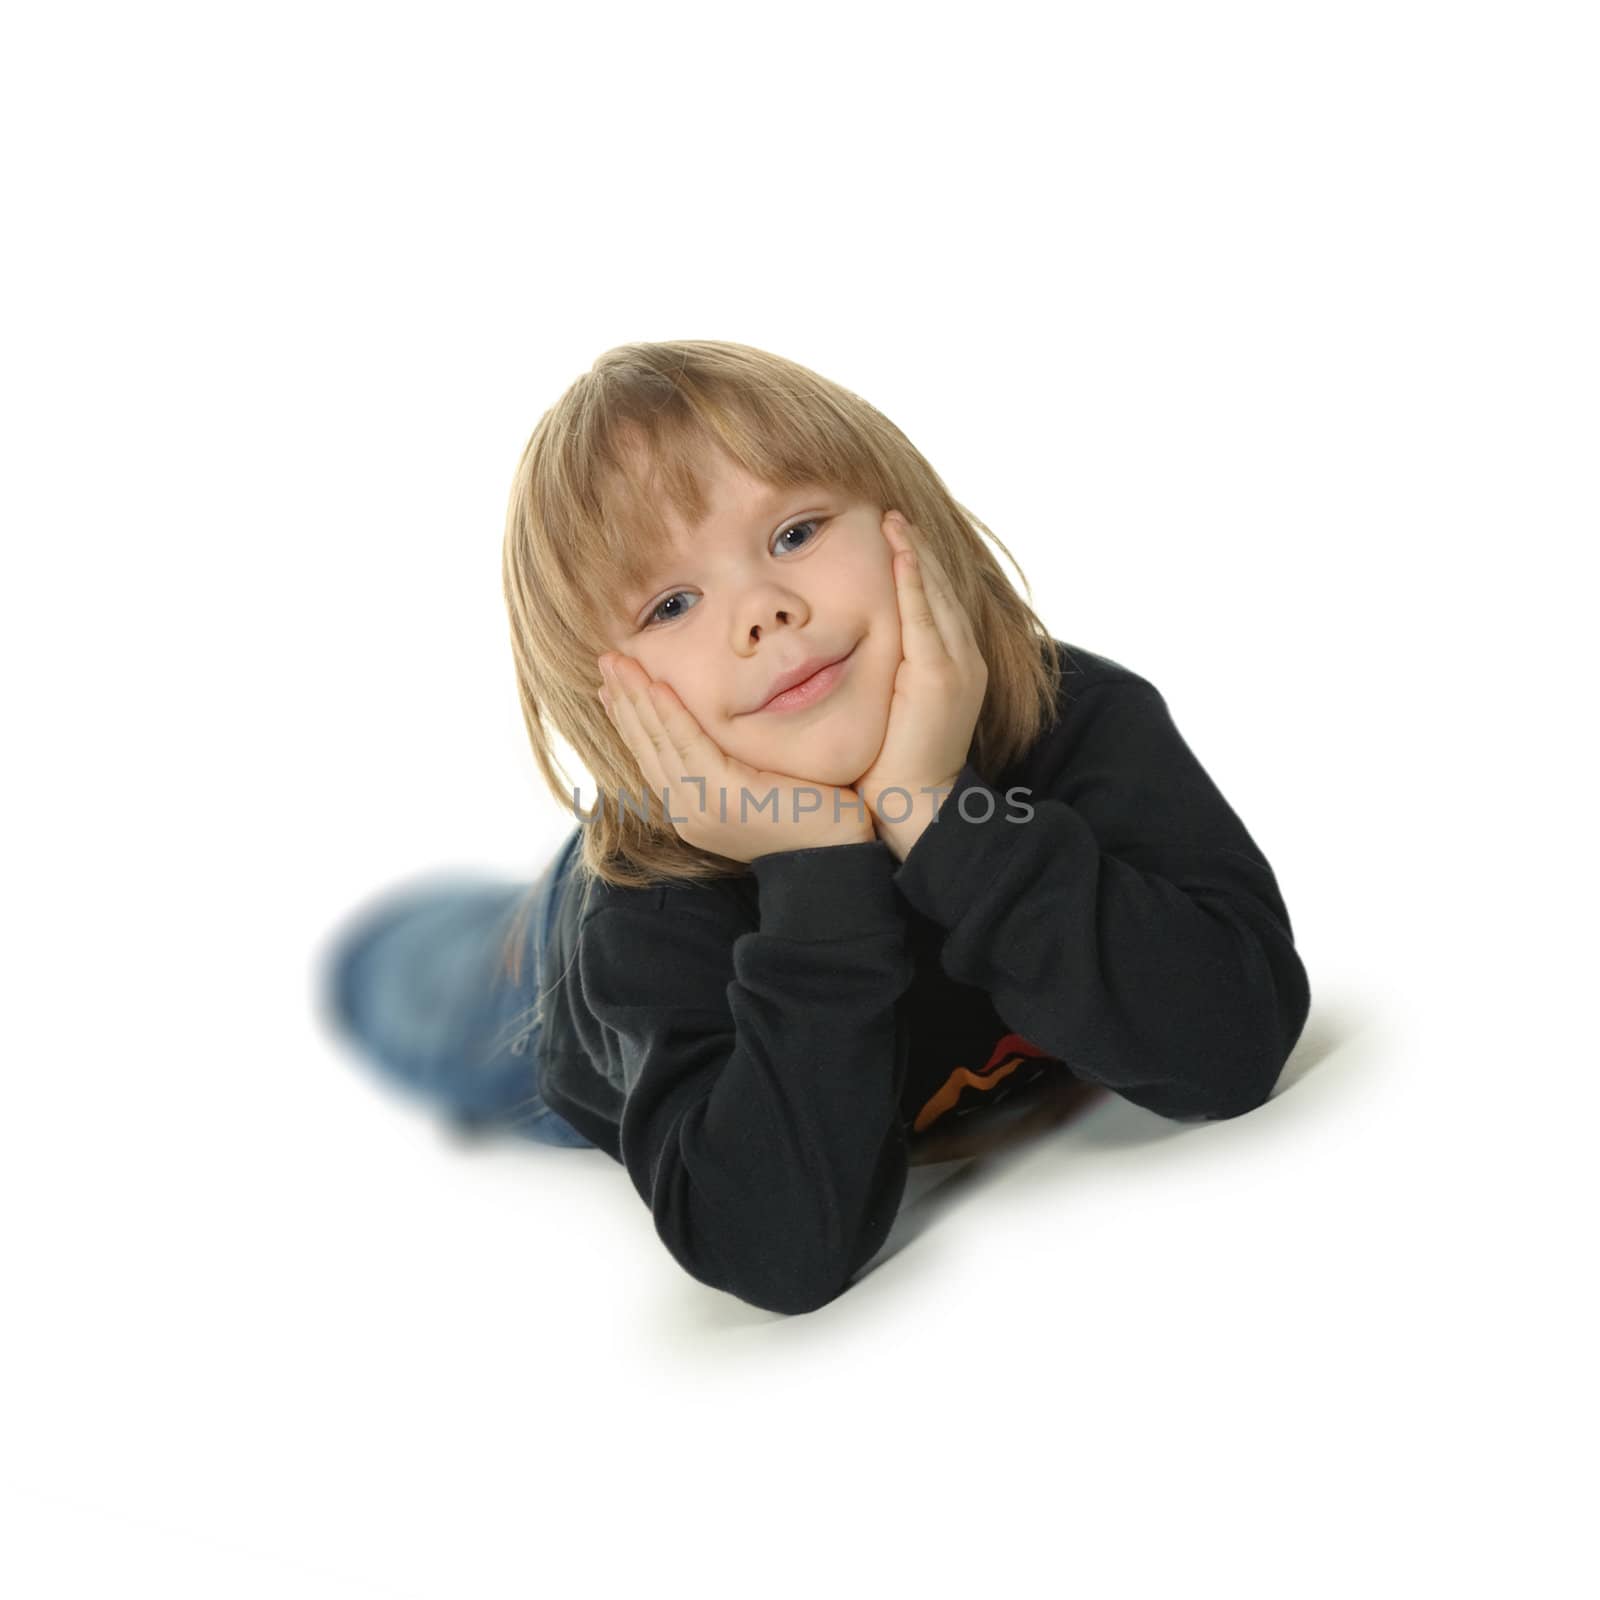 The little boy lays on a floor. It is isolated on a white background